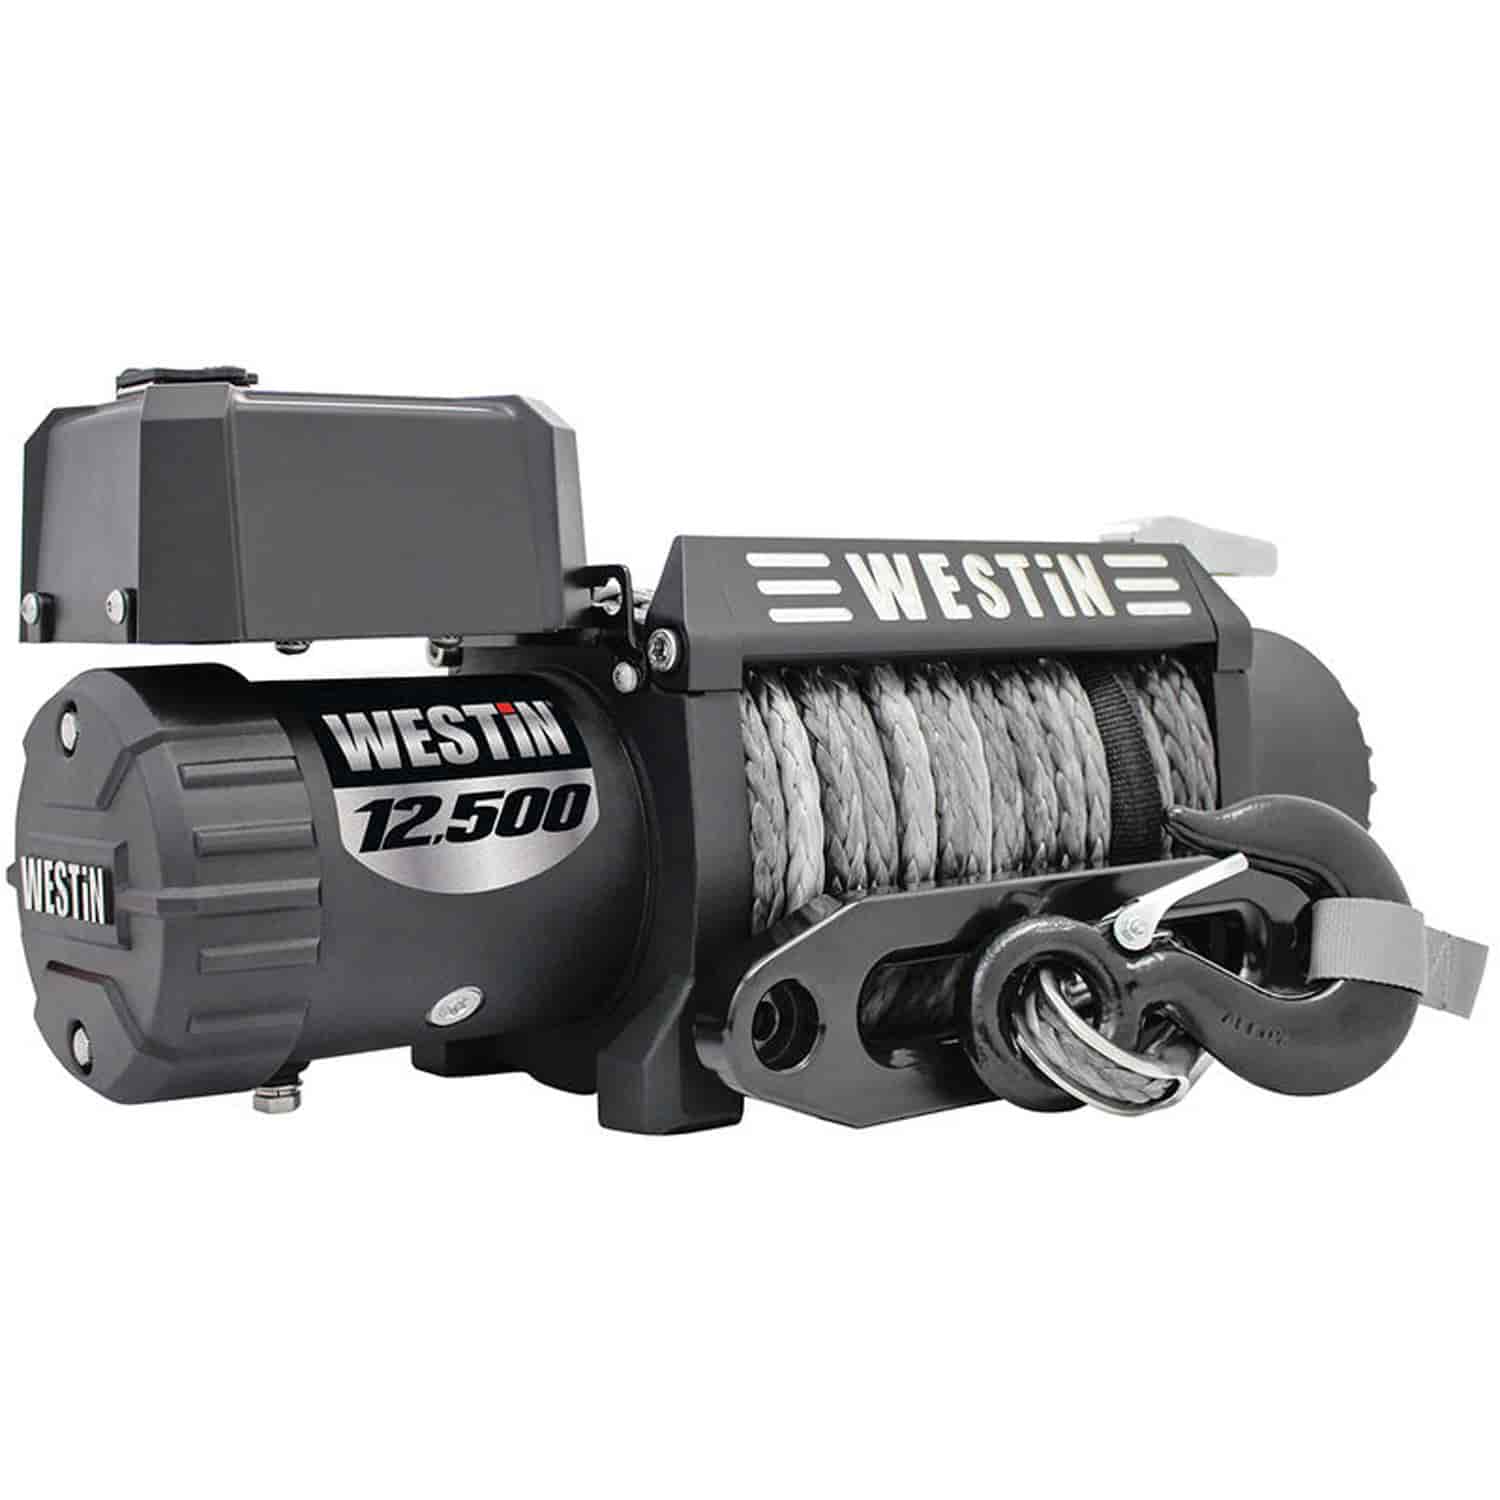 Off-Road Series 12V 12500LBS Synthetic Rope Winch